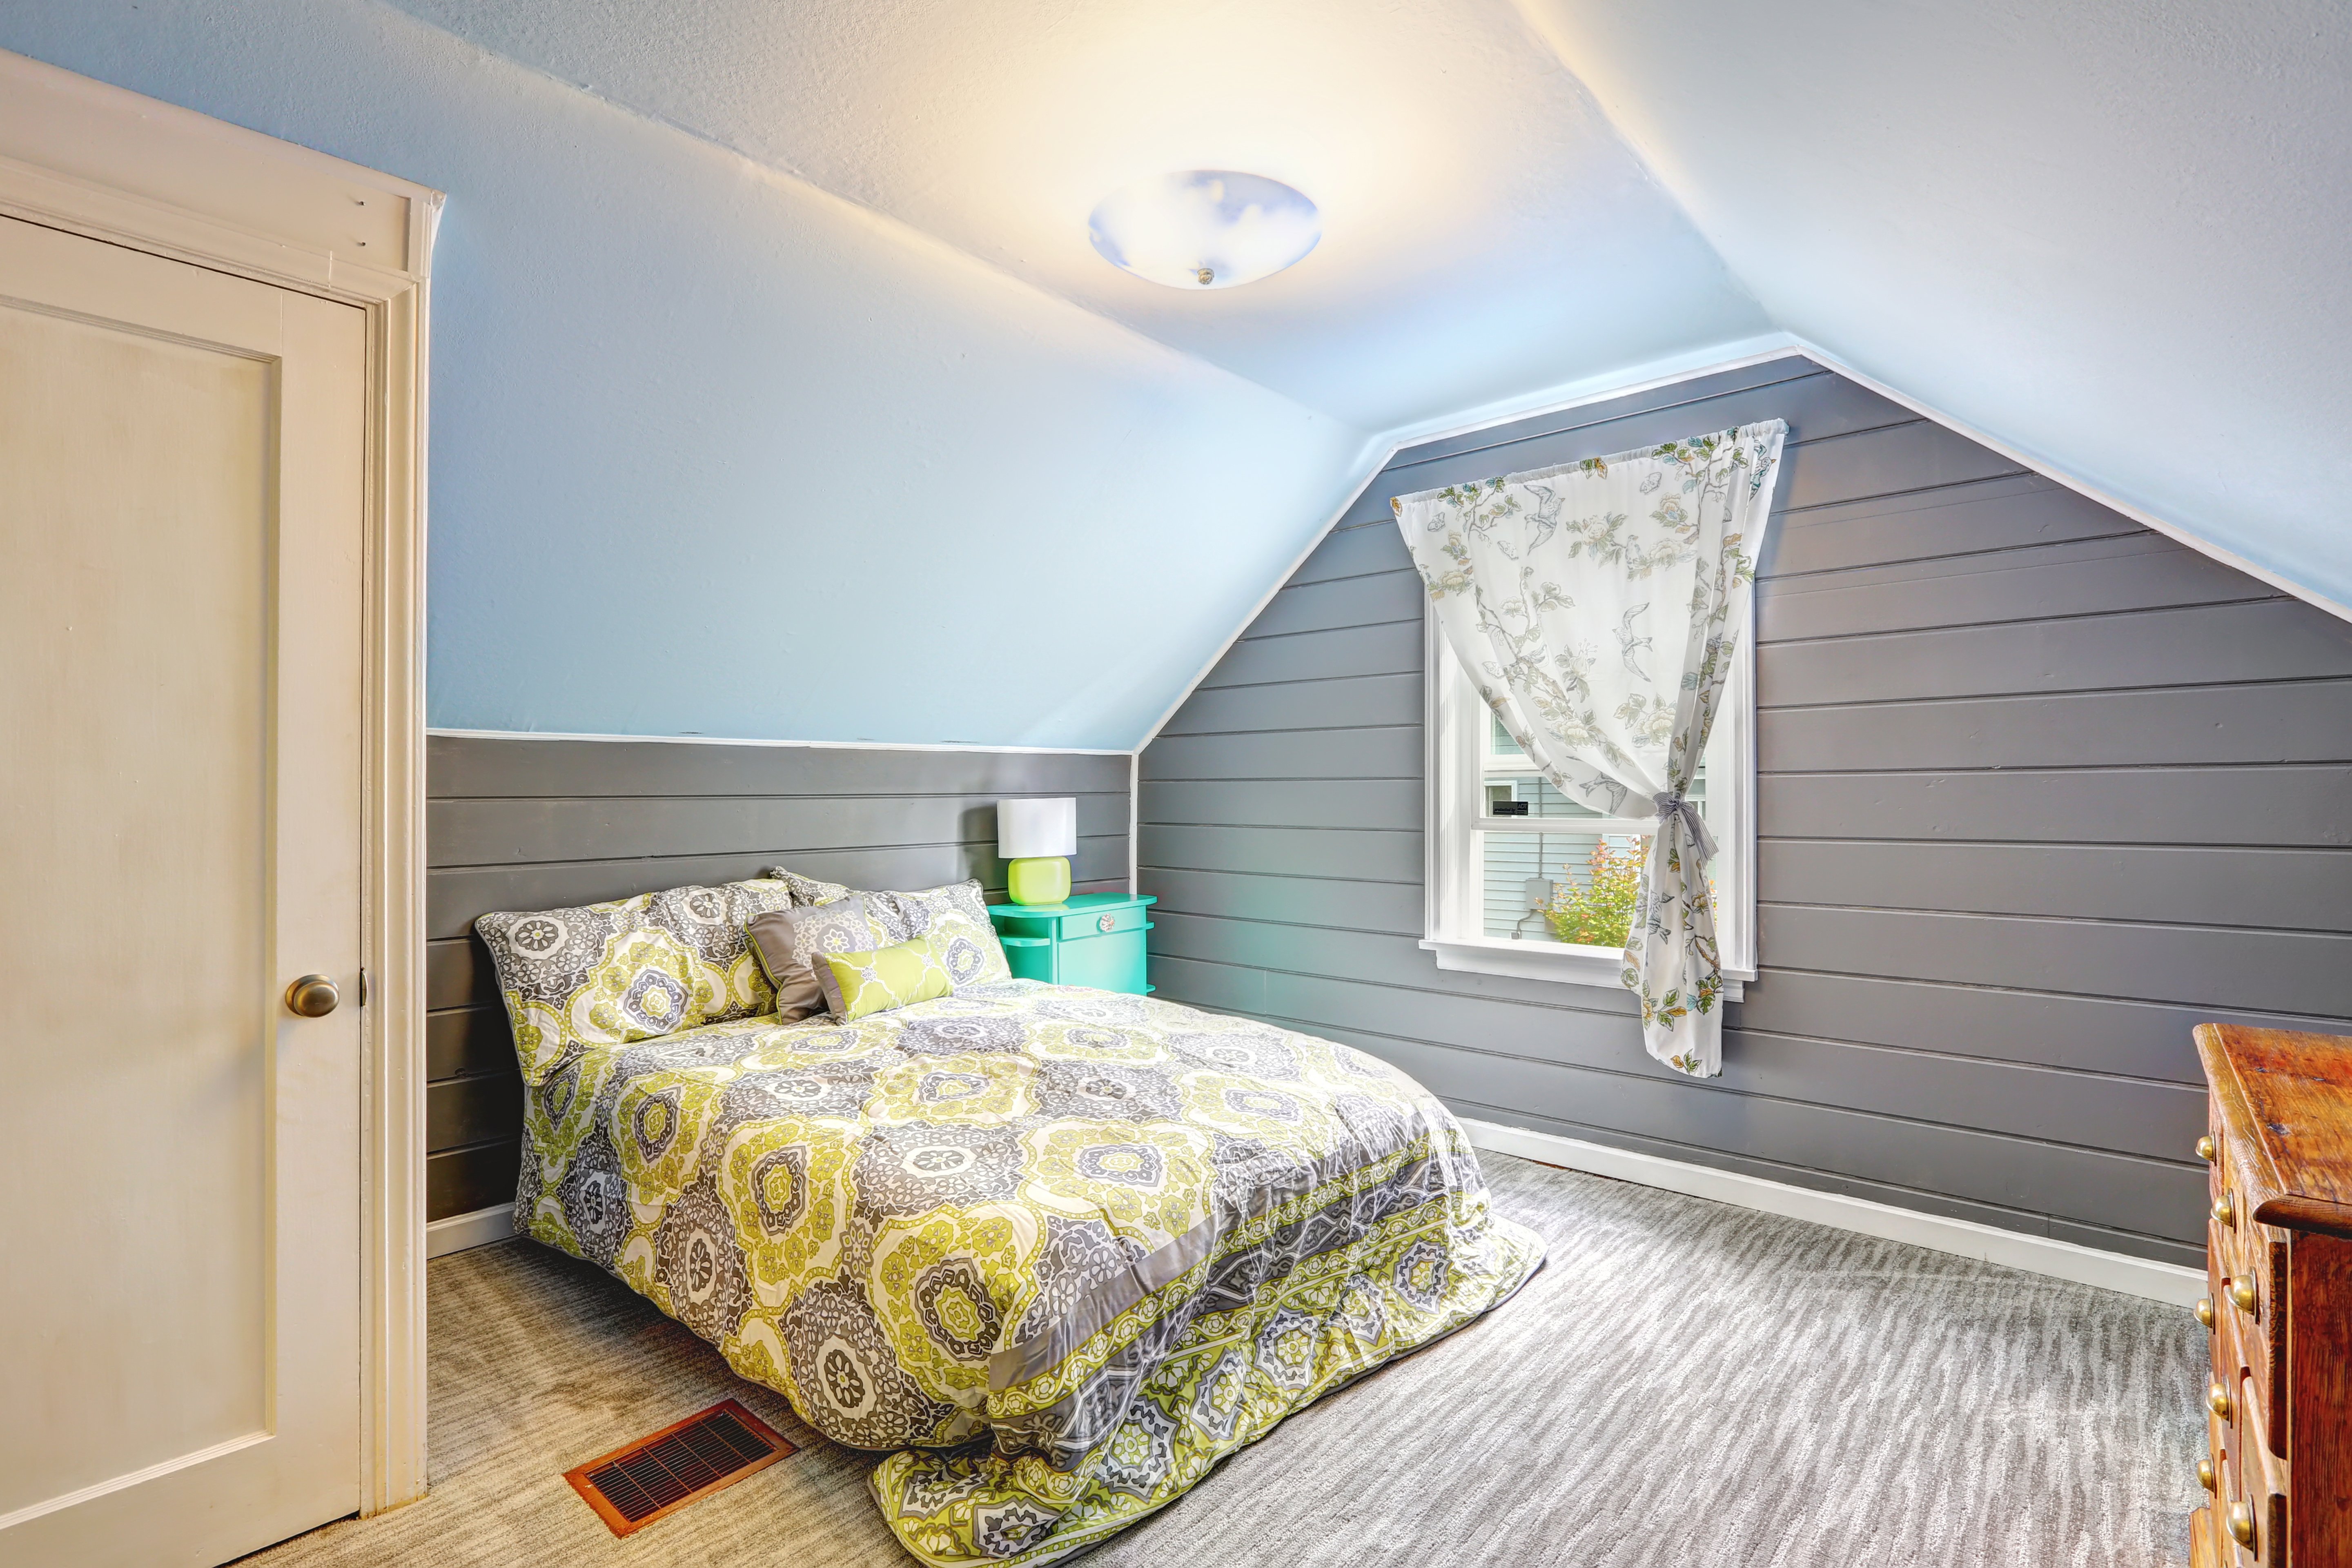 Vaulted ceiling horizontal wall cladding used in a bedroom attic